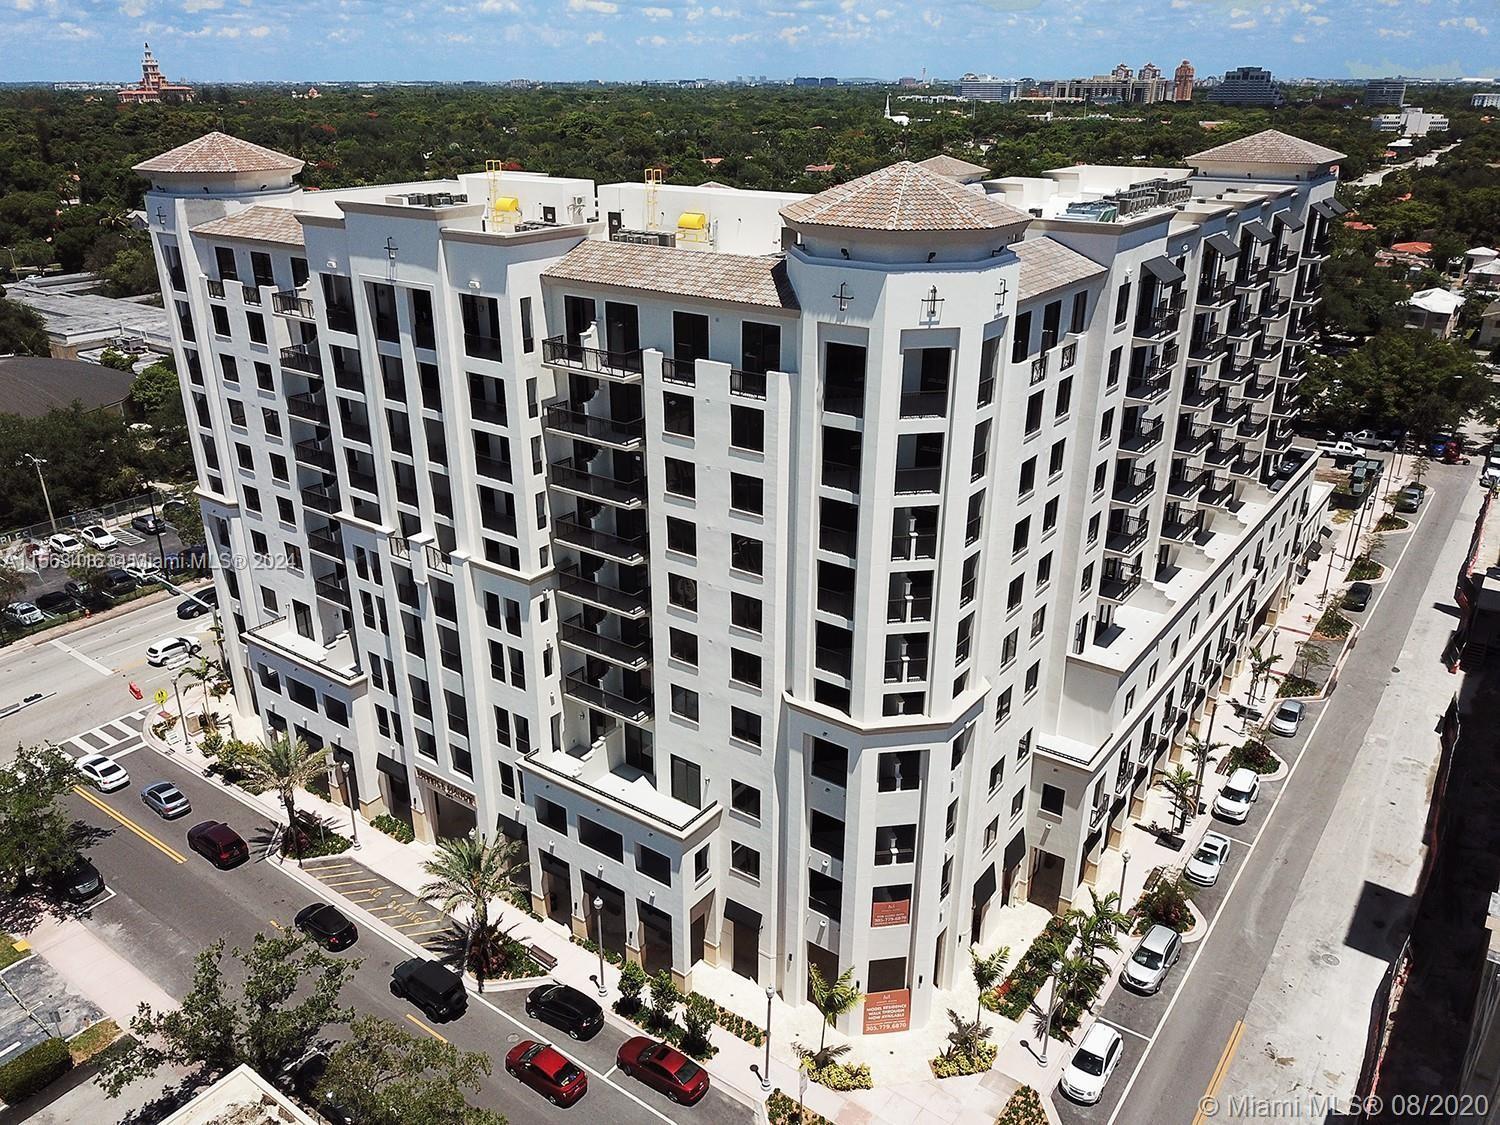 Merrick Manor offers the final inventory of newer luxury condominiums below $600,000 for at least th